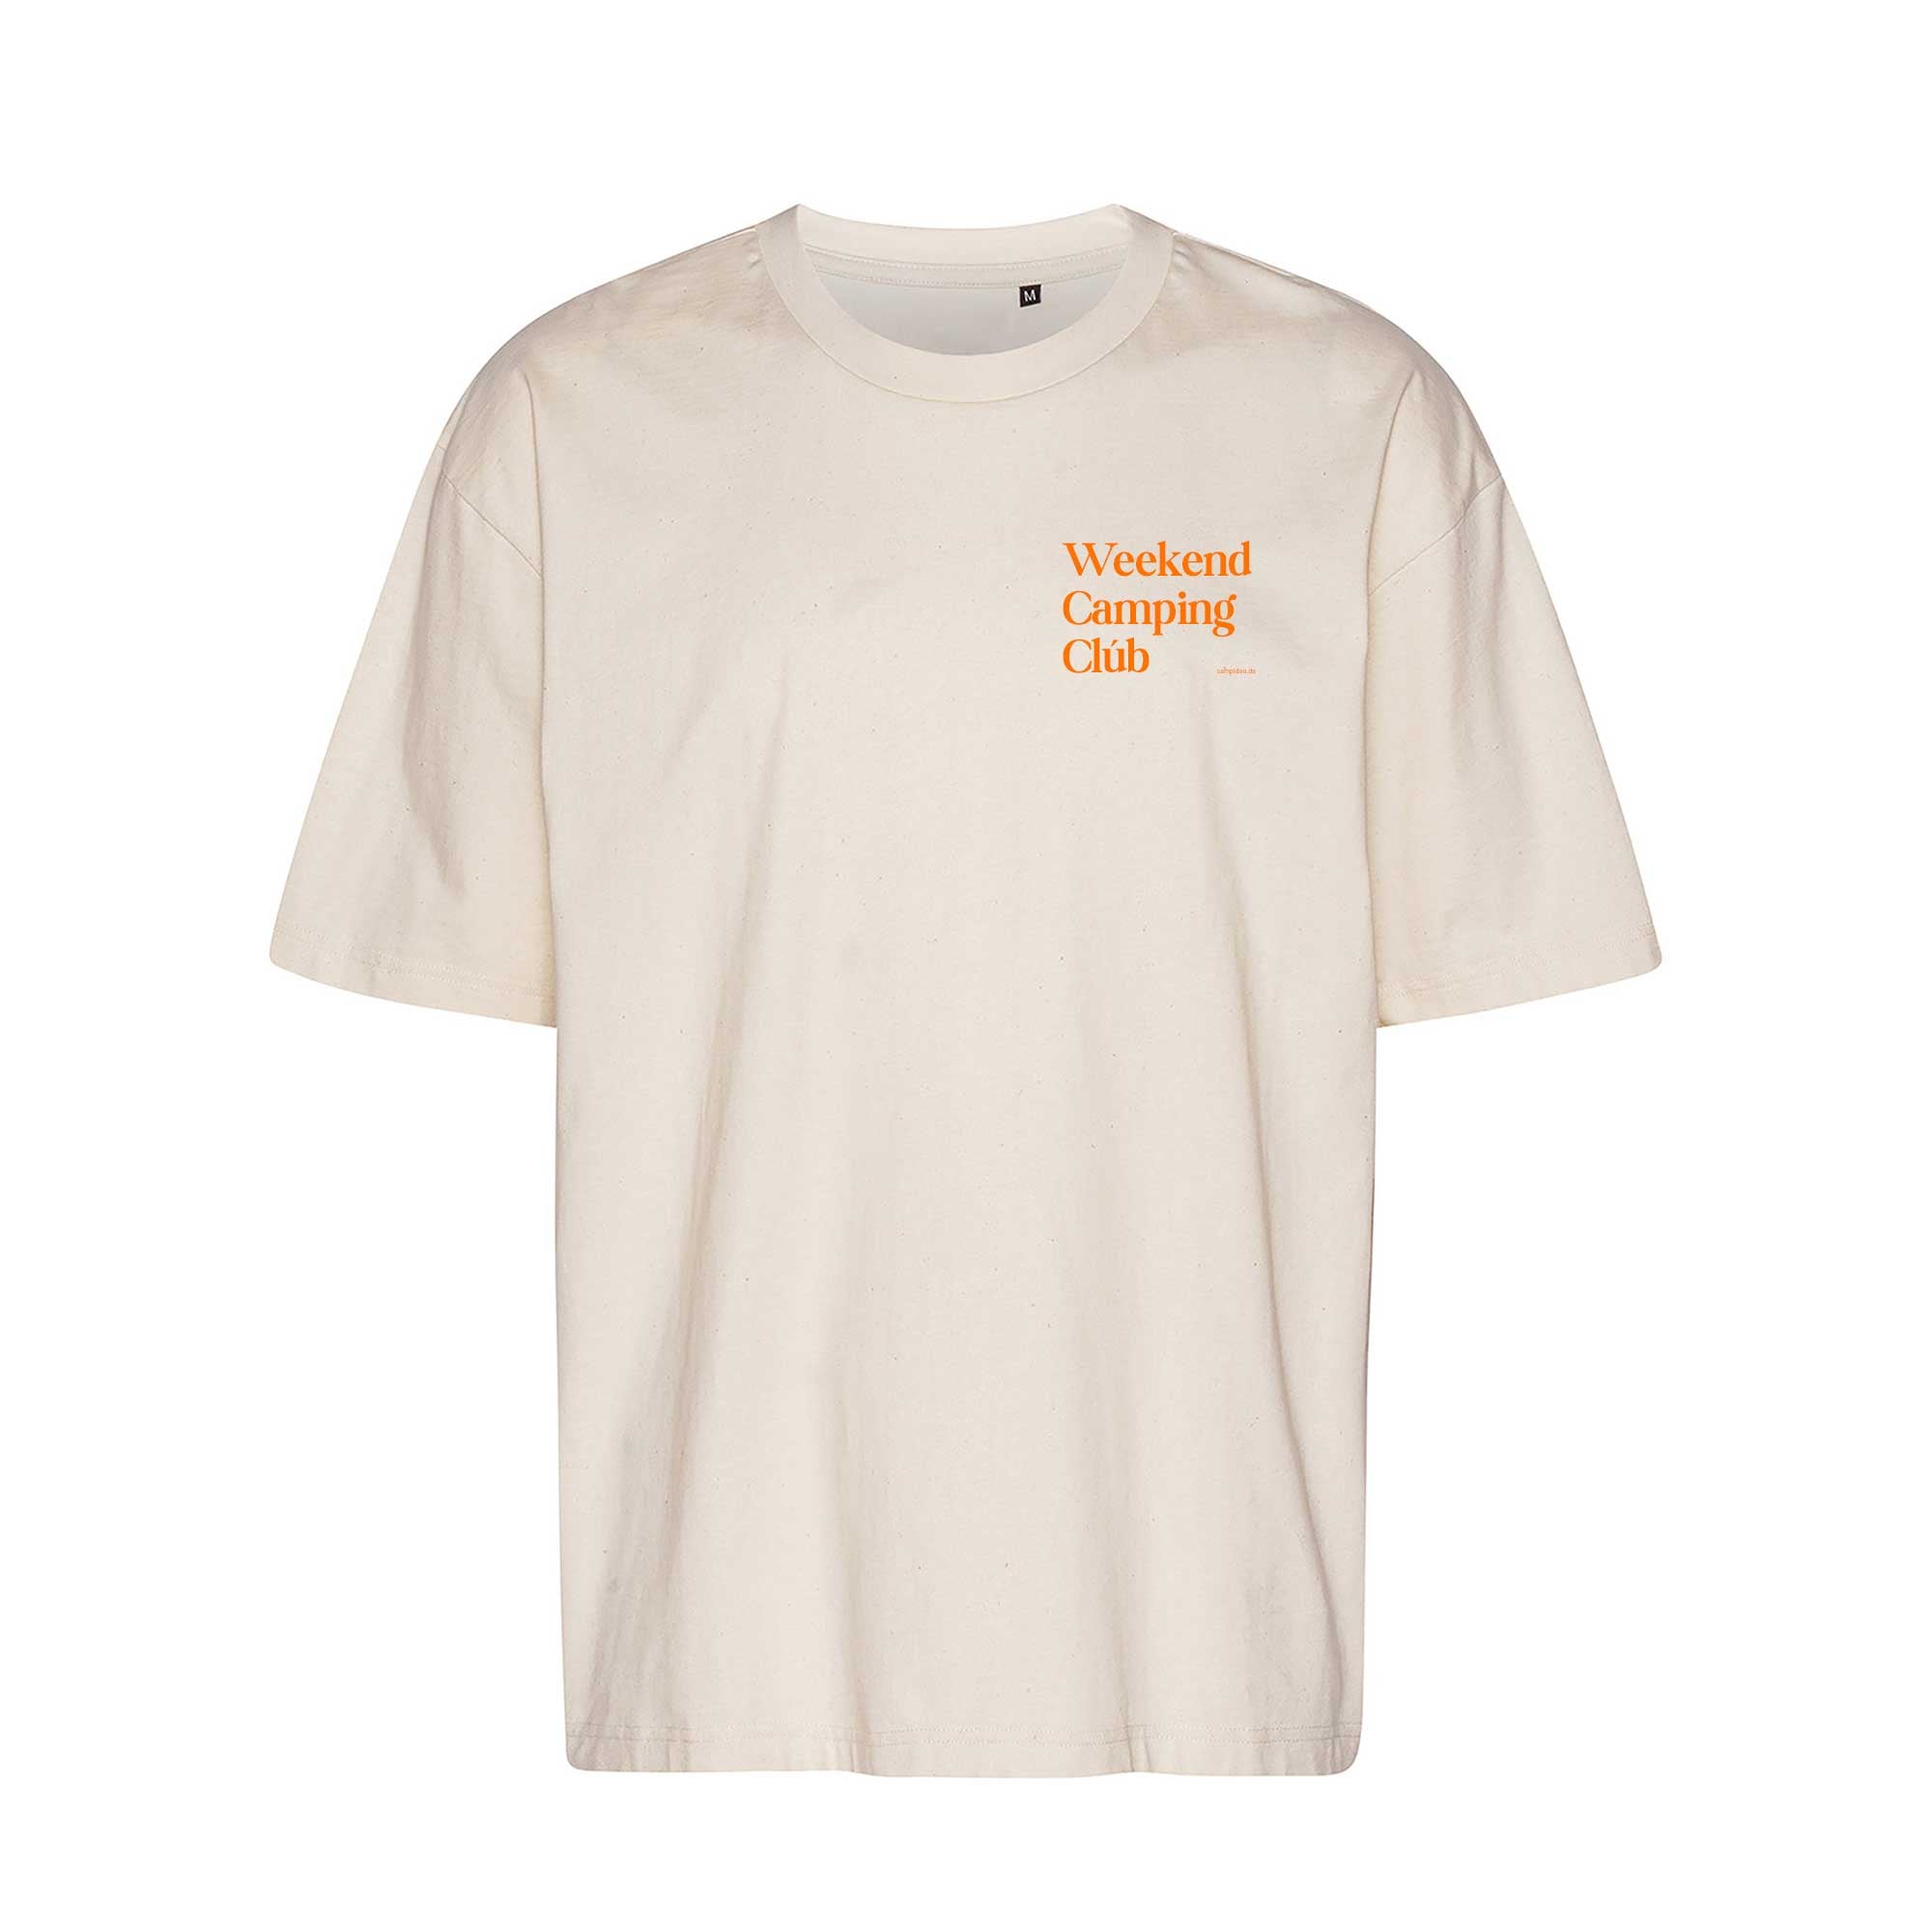 Oversized T-Shirt OFF-WHITE "Weekend Camping Club"